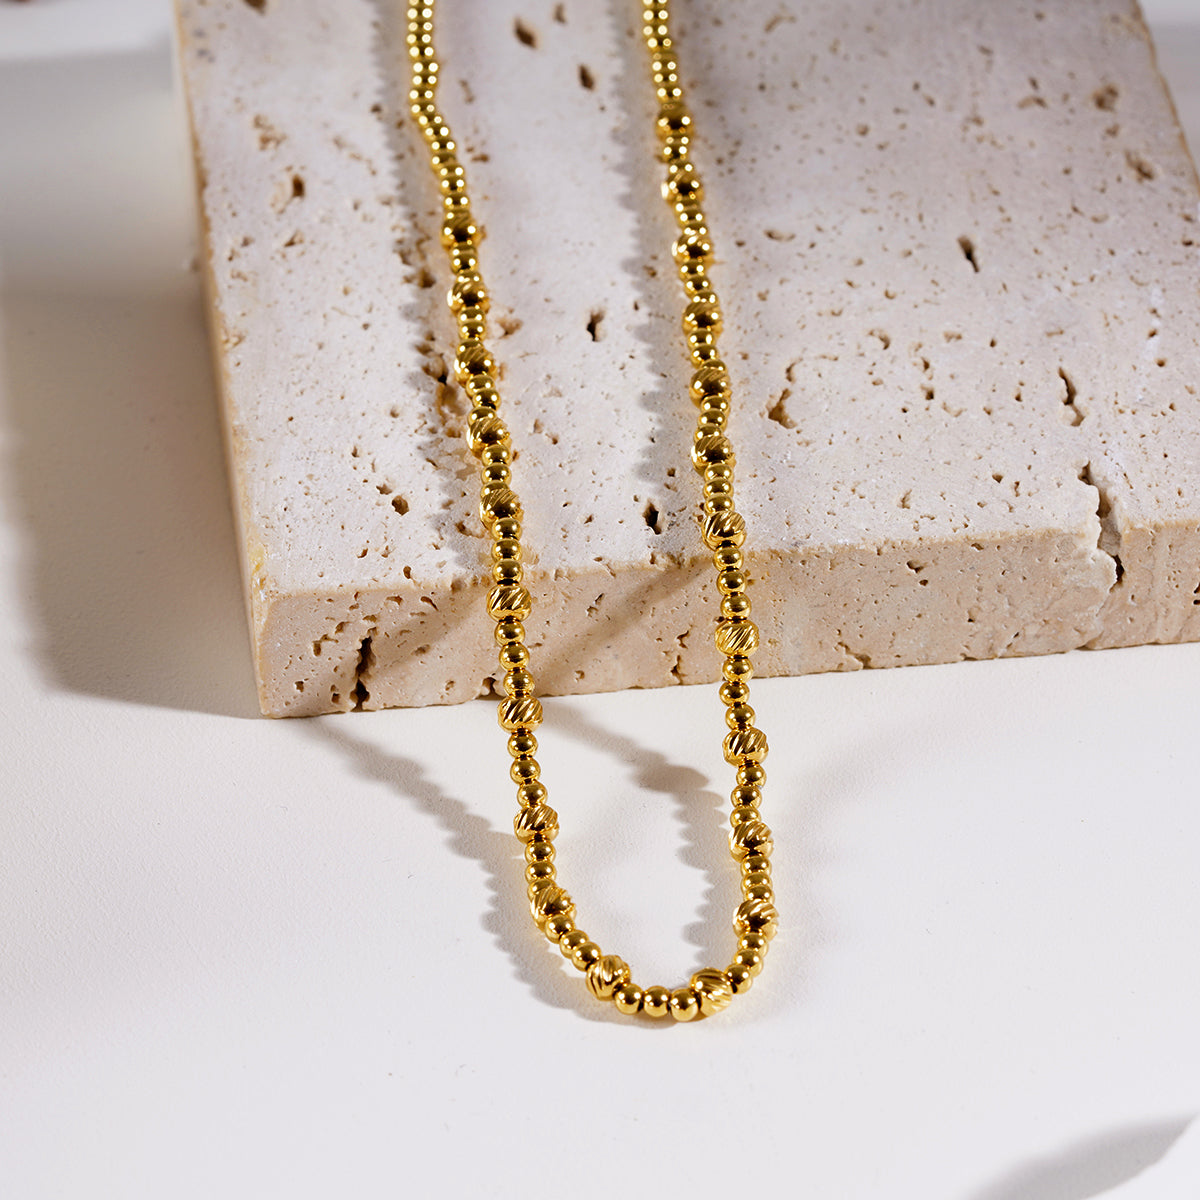 Style MILLIE 4469: Twin-Bead Fusion Gold Chain Necklace.